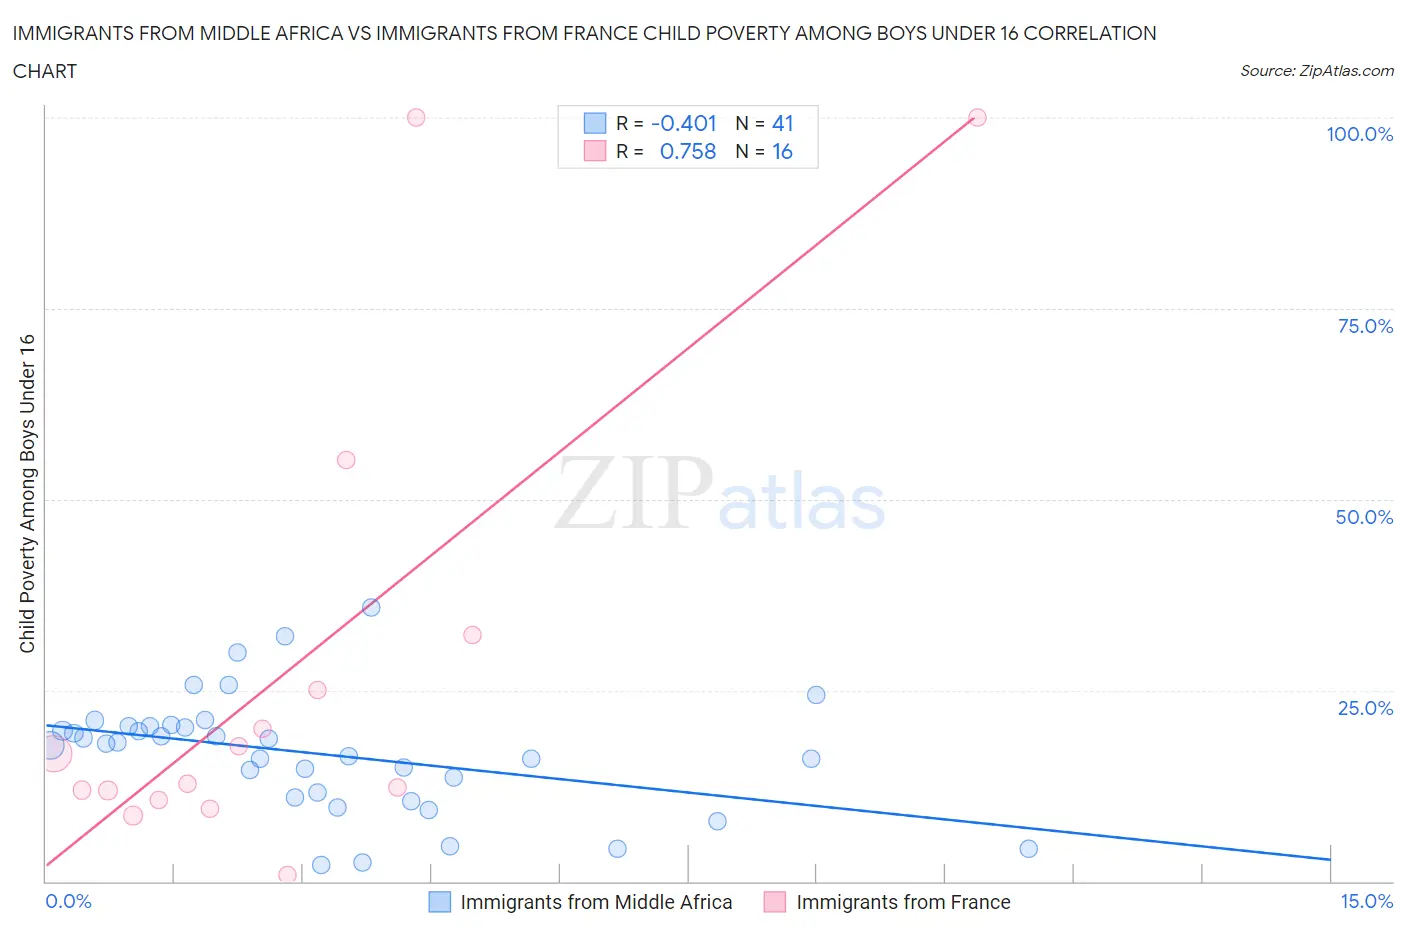 Immigrants from Middle Africa vs Immigrants from France Child Poverty Among Boys Under 16